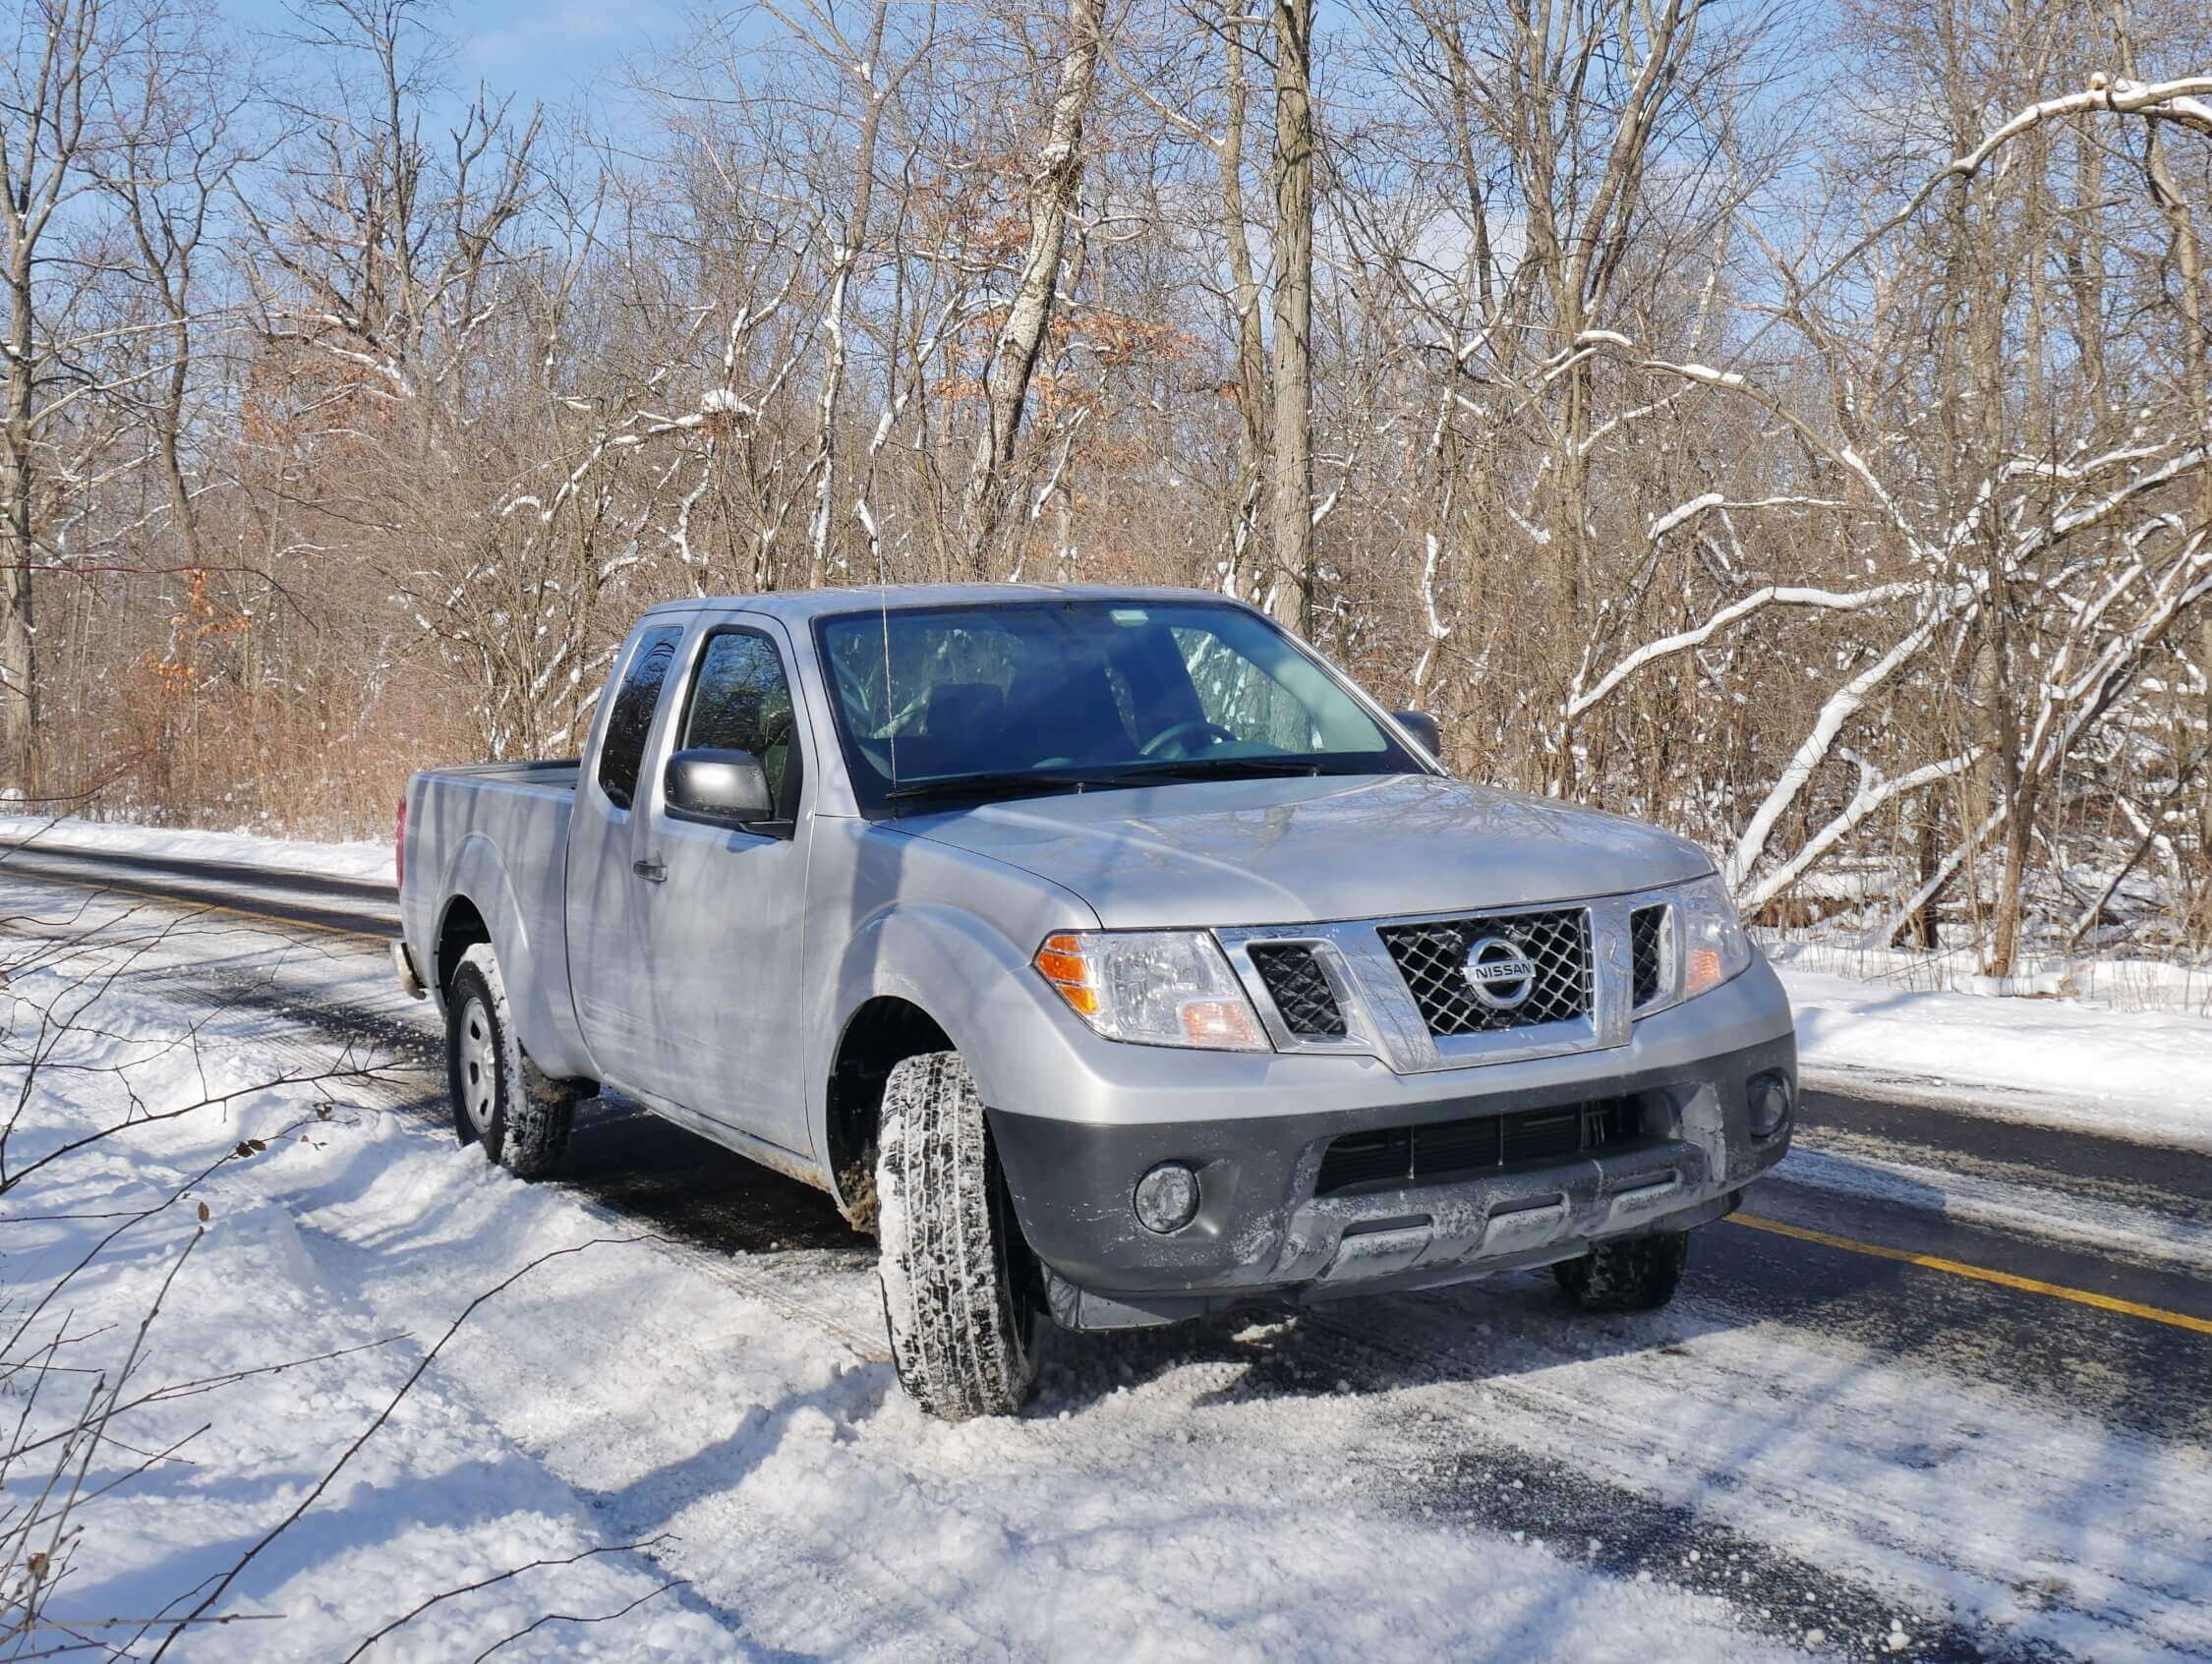 2018 Nissan Frontier S King Cab 4x2: Not too fancy that you wouldn't want to take it to the great outdoors